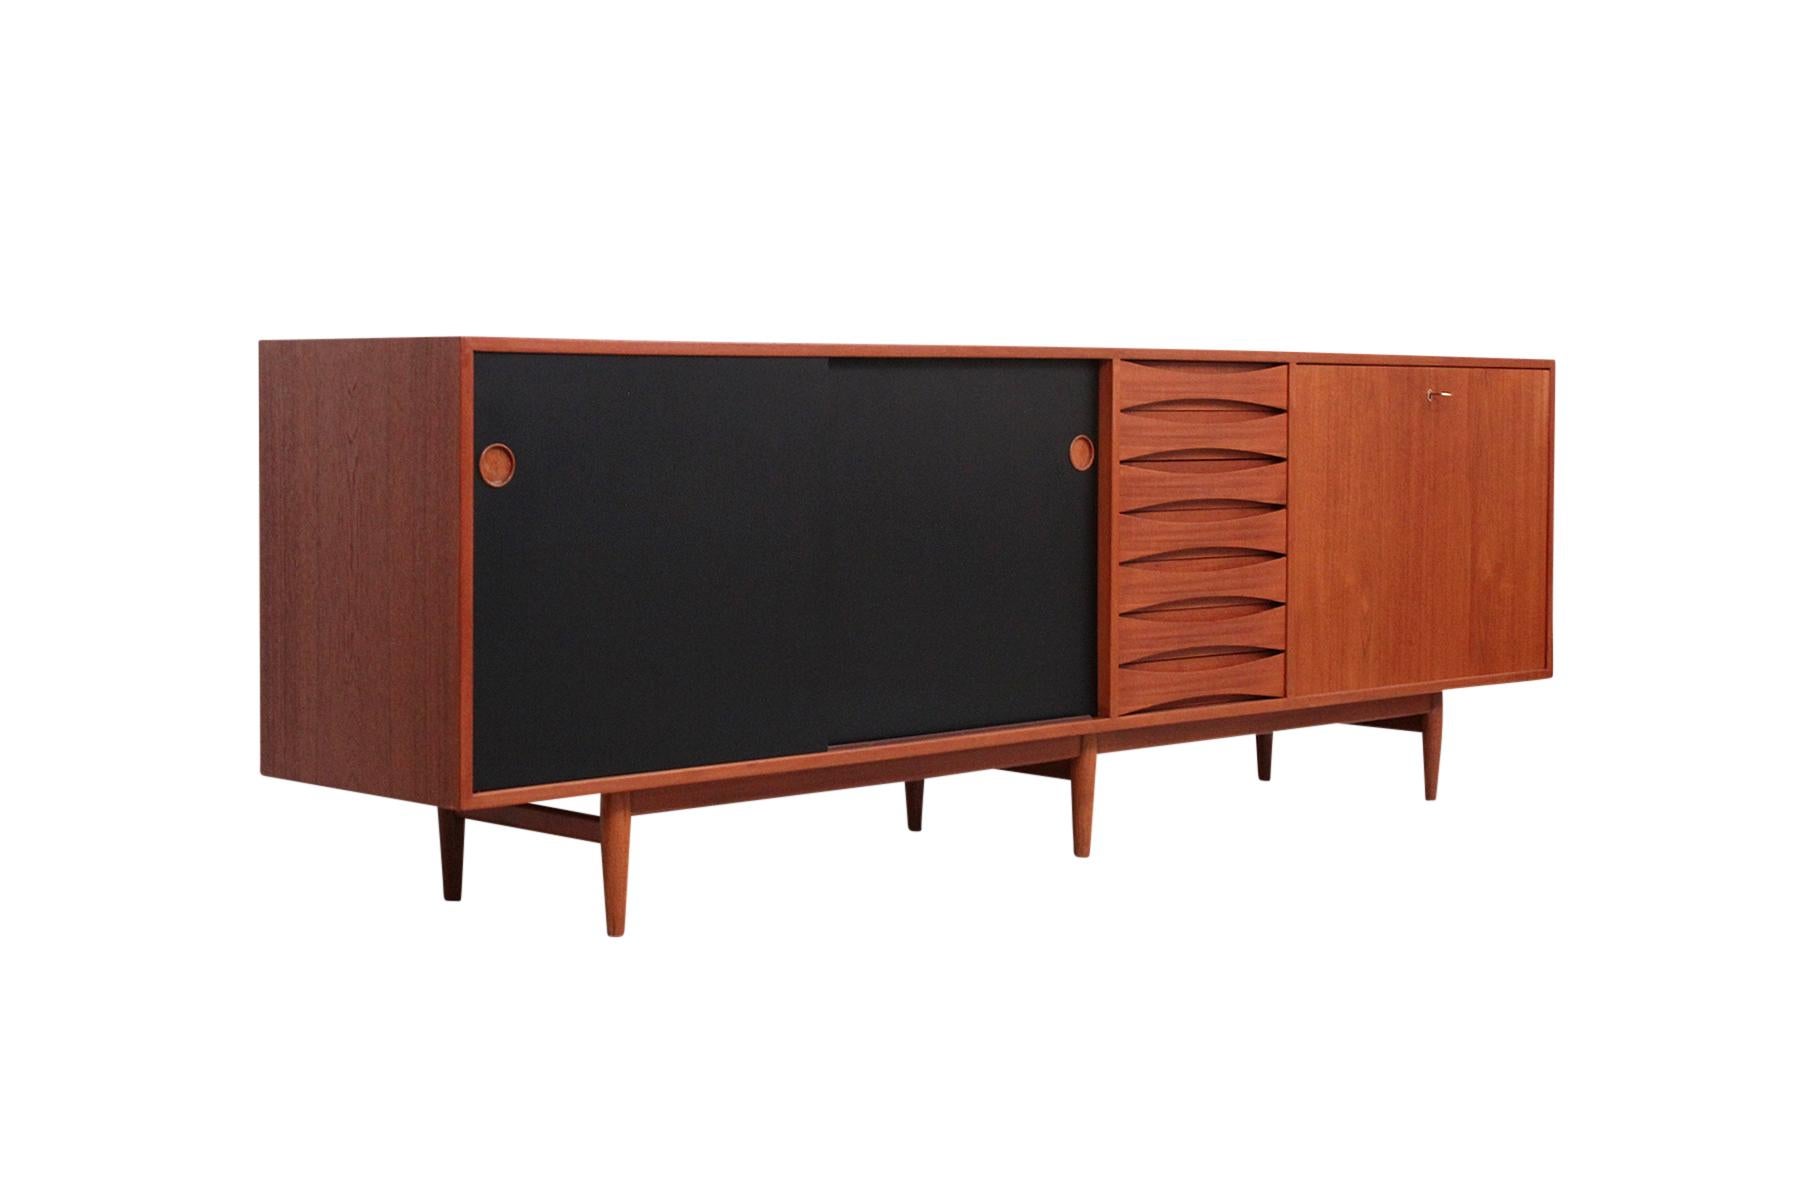 Iconic “Triennale” sideboard credenza designed by Arne Vodder for Sibast. This configuration with teak case, black enamel and teak reversible doors, drop down cabinet, and center pedestal of classic Vodder designed drawers.